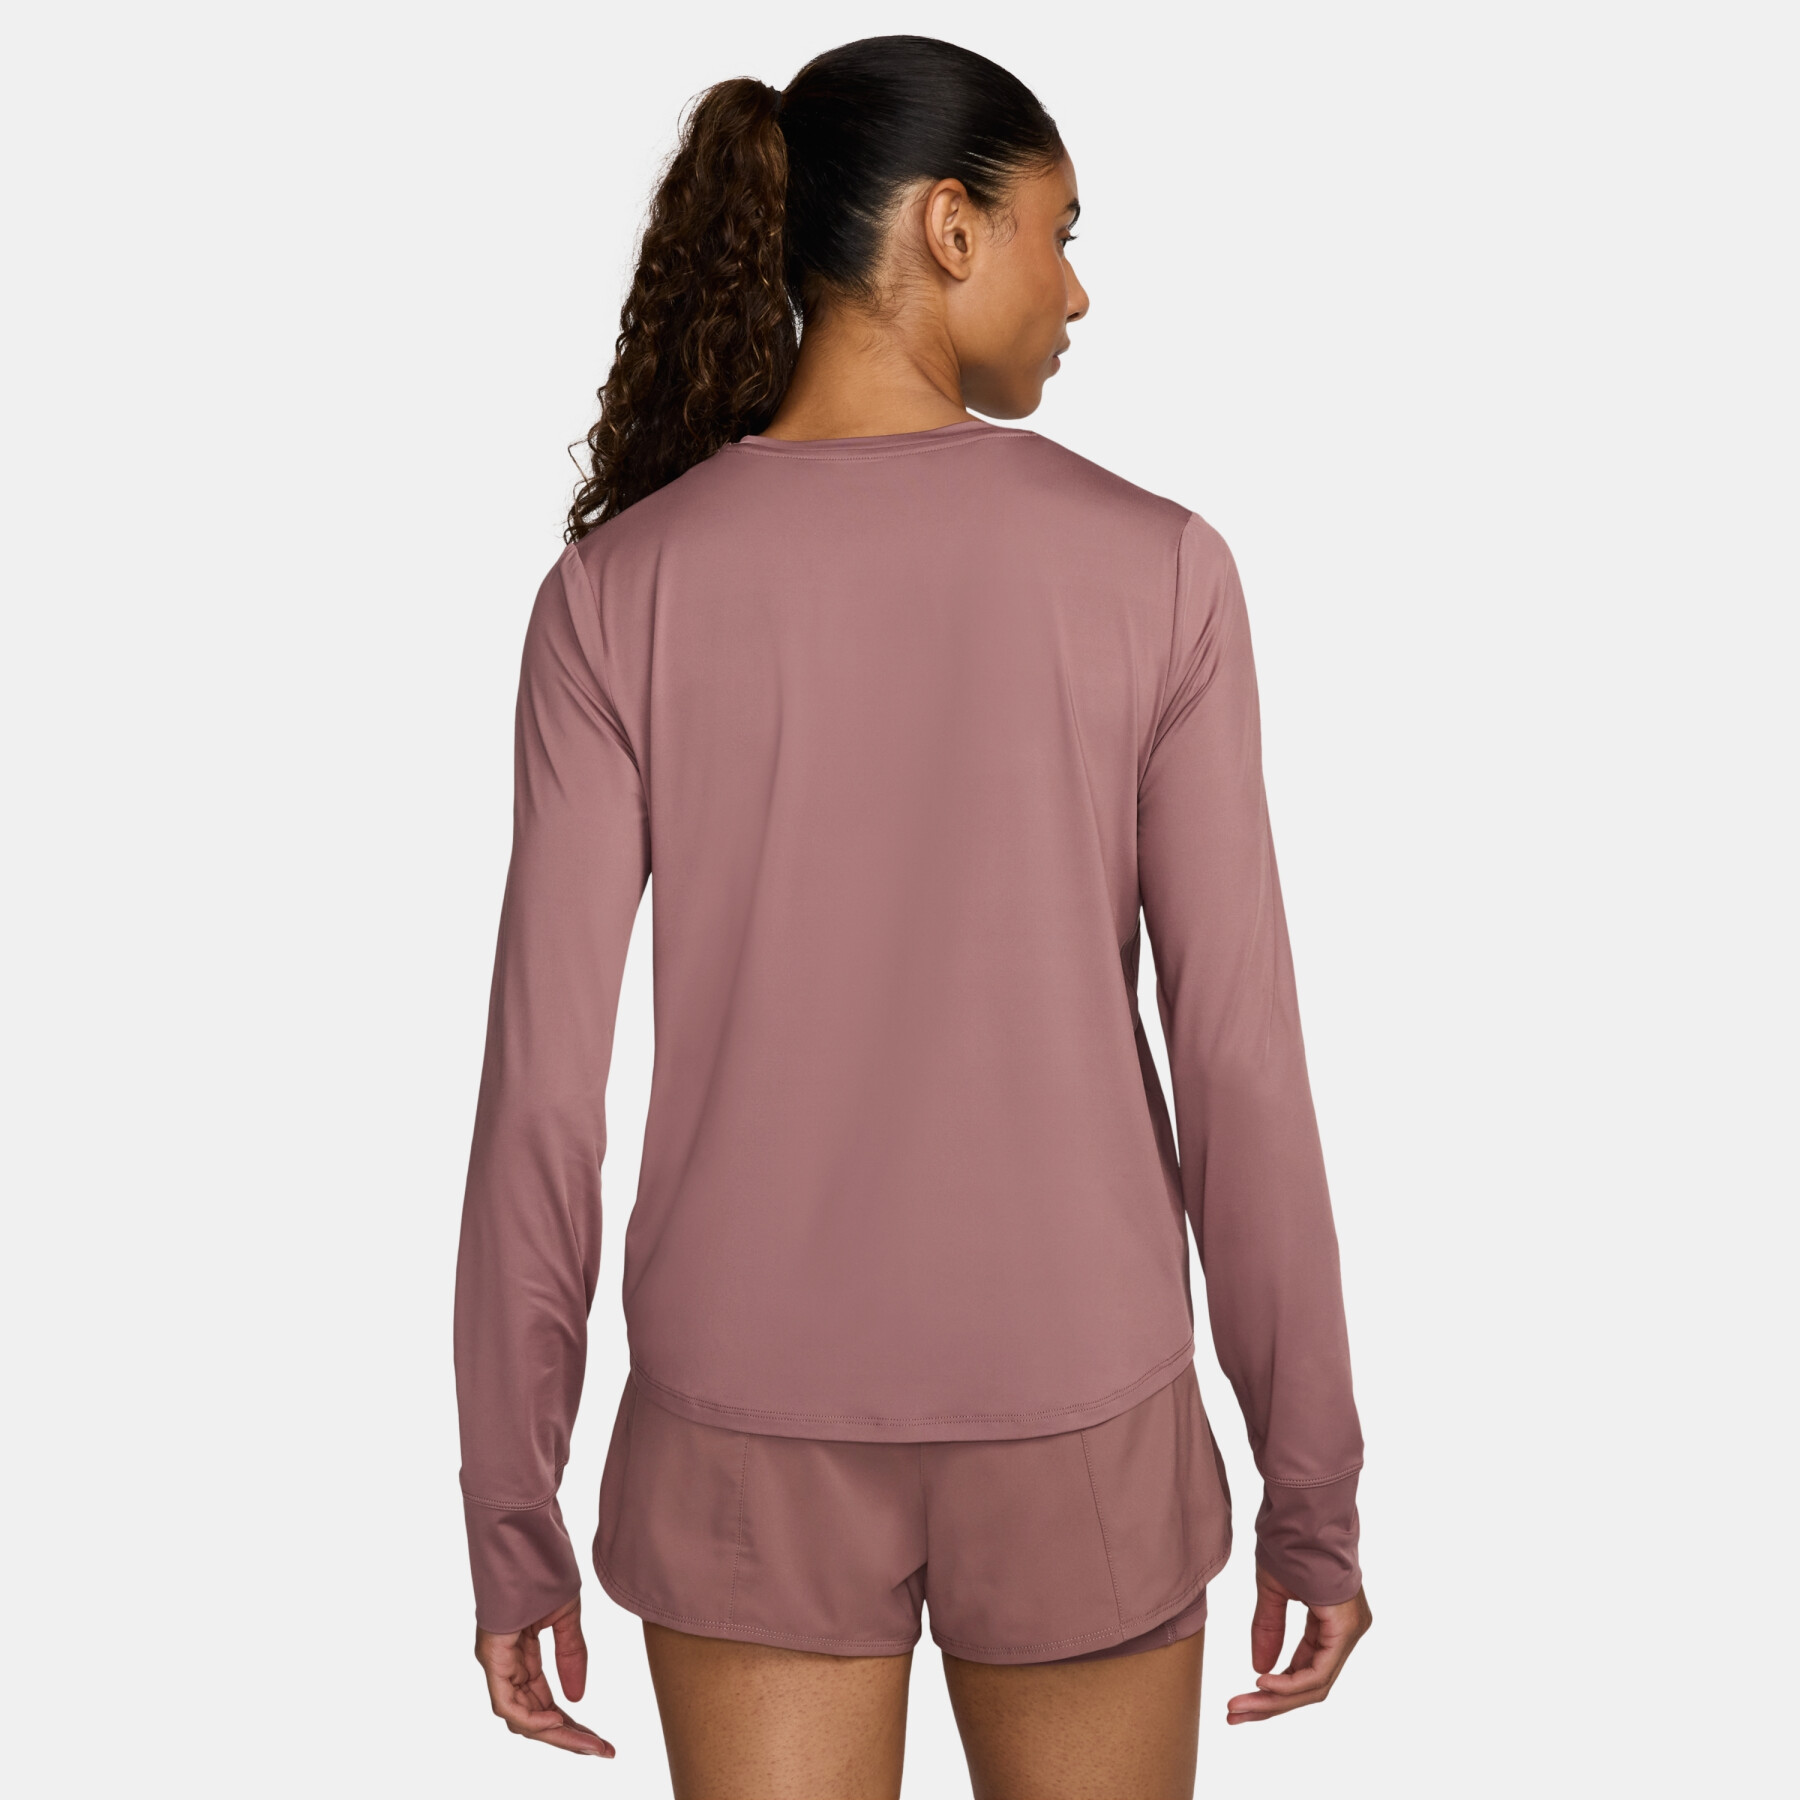 Maillot manches longues femme Nike One Classic